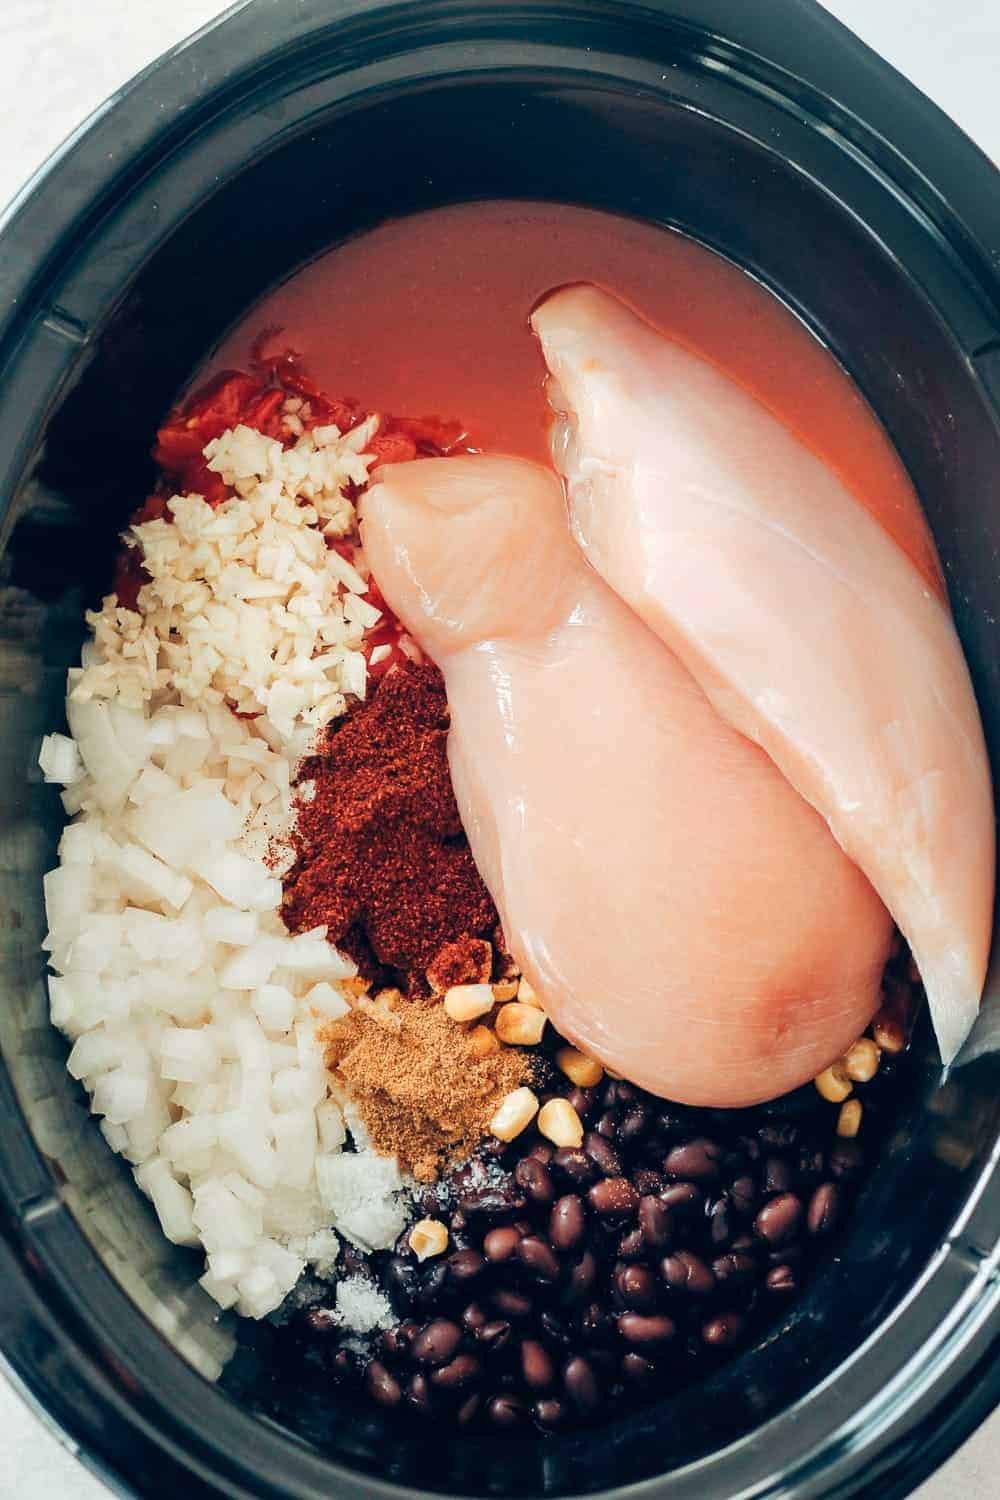 The ingredients in the slow cooker before cooking